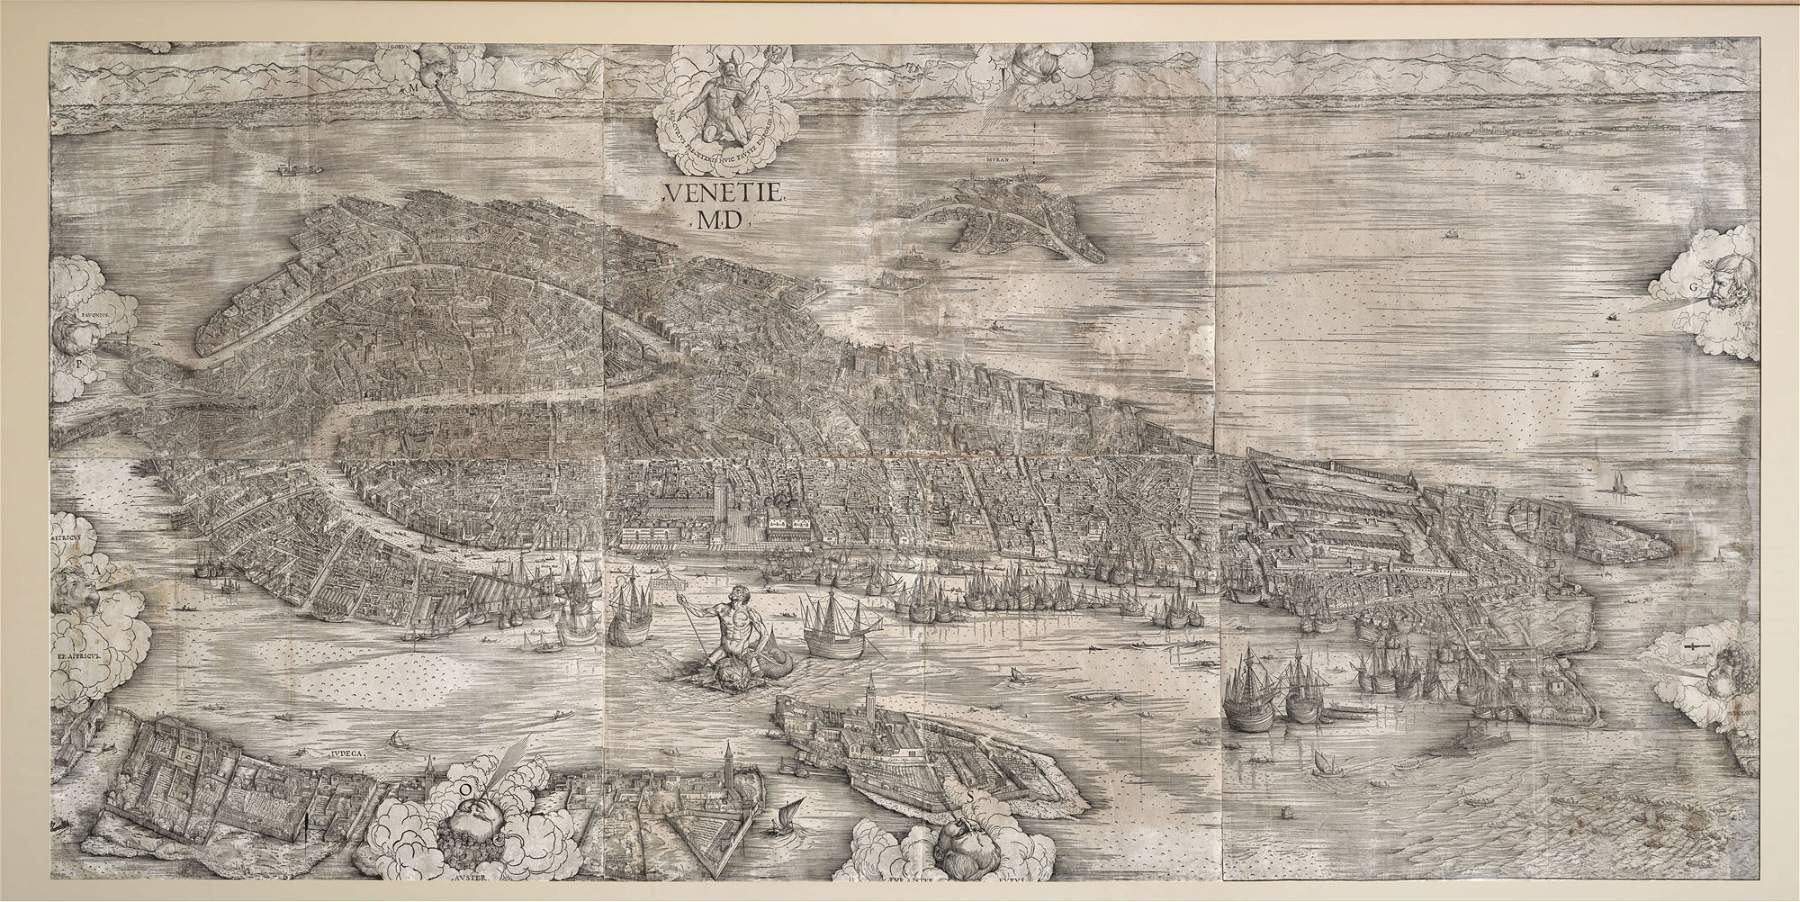 An extraordinary feat between art and cartography: the map of Venice by Jacopo de' Barbari